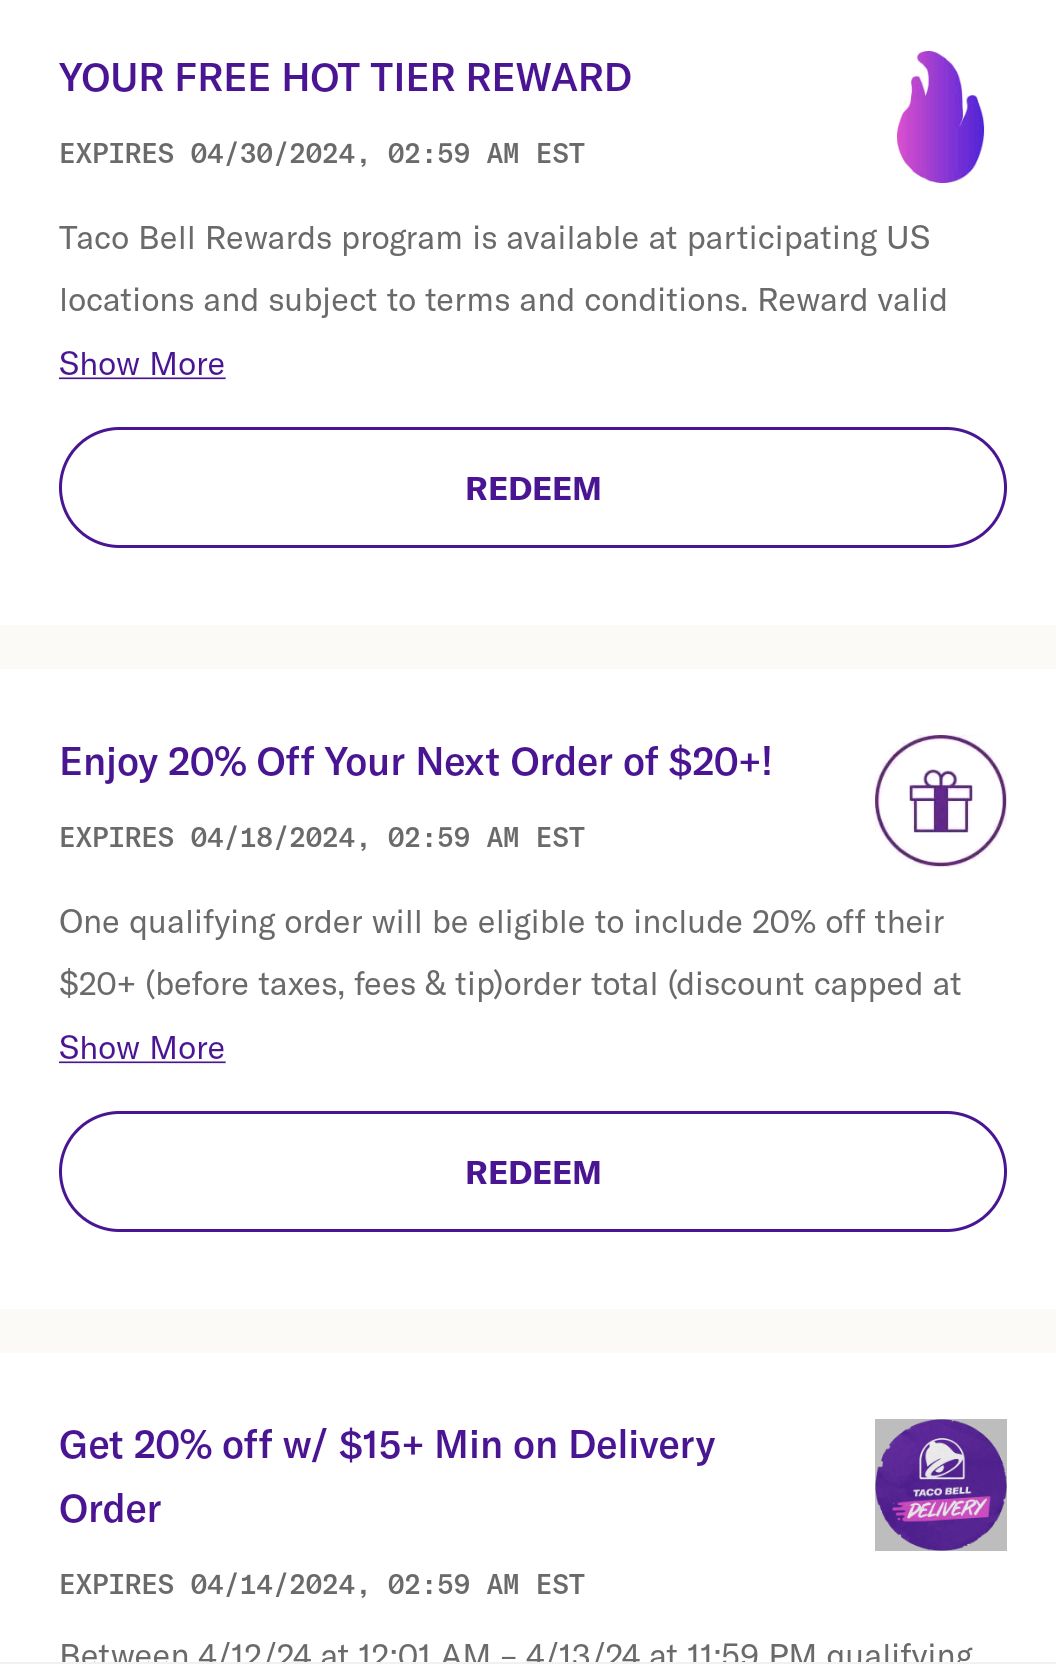 Taco Bell Rewards: 20% Off $20+ Order (YMMV / Targeted "Just For You" Offer) *Max $10 Discount